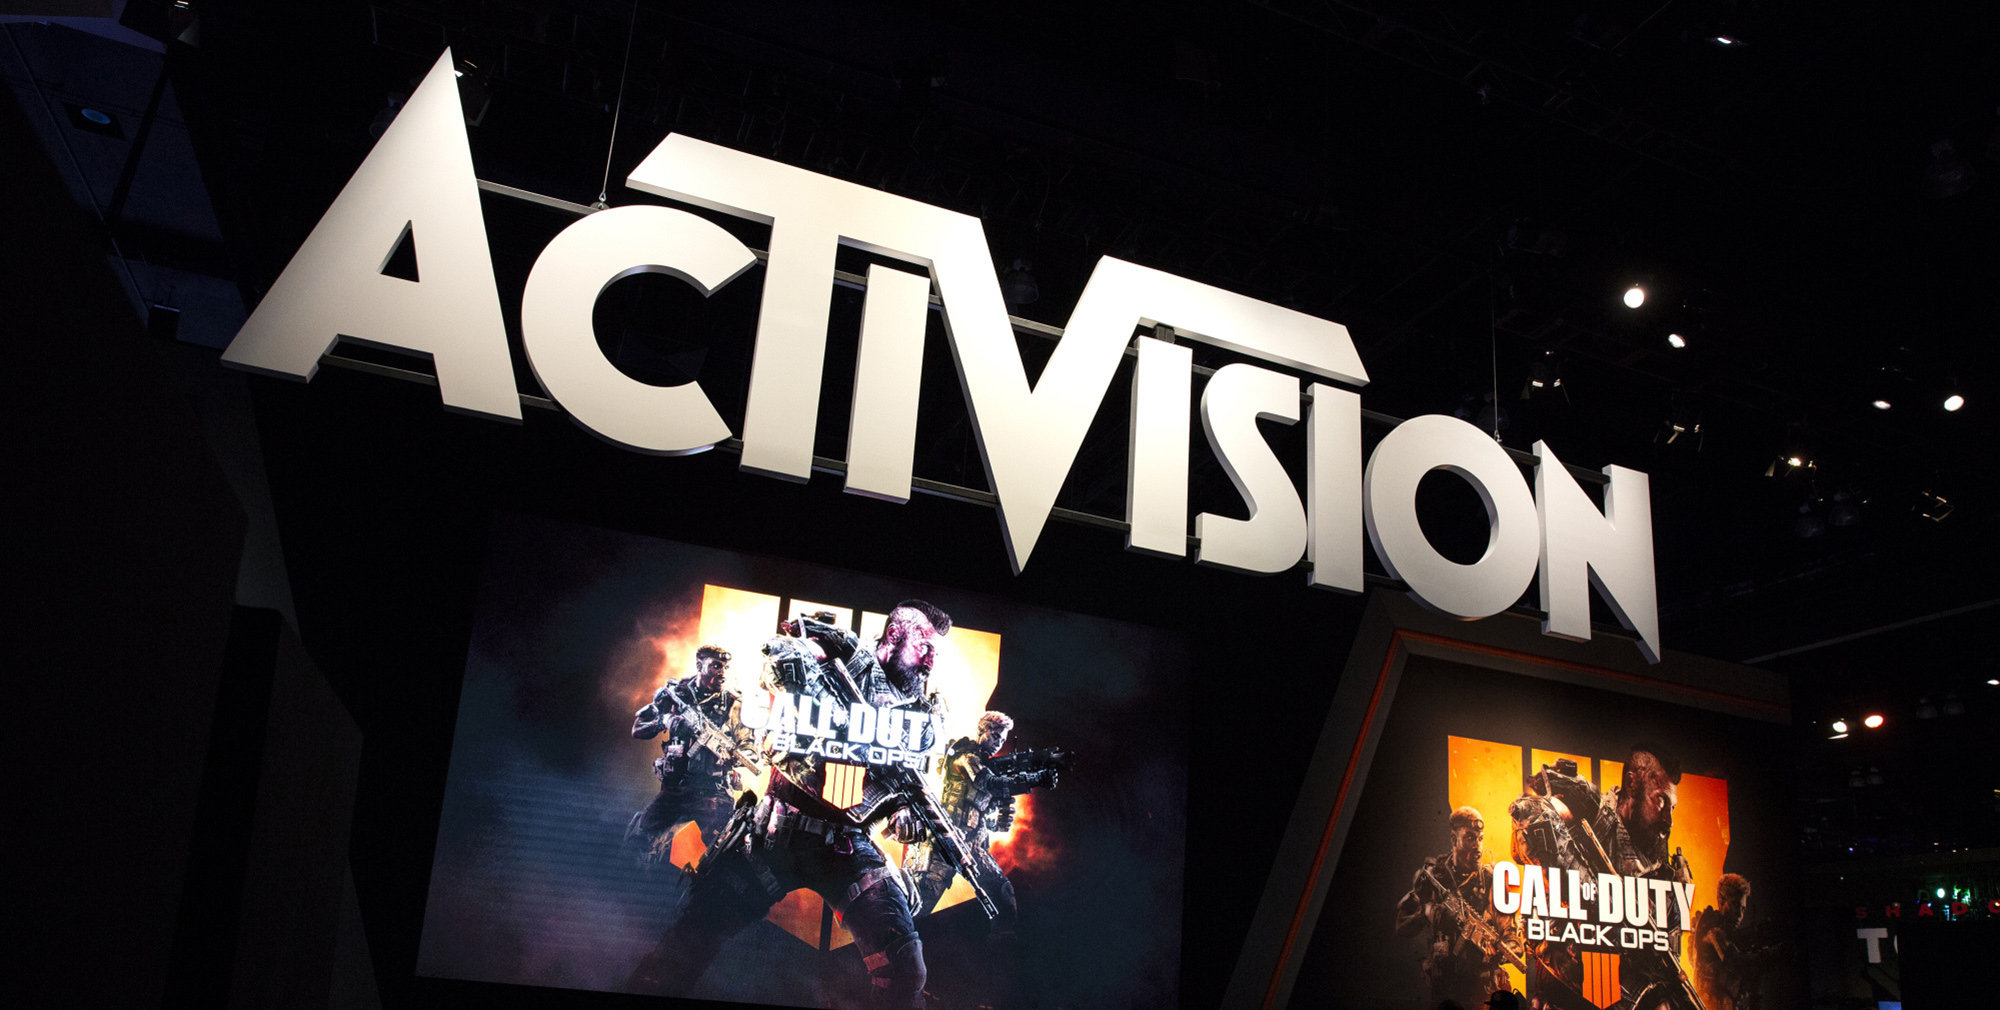 Microsoft acquires Activision Blizzard to add to XBox arsenal